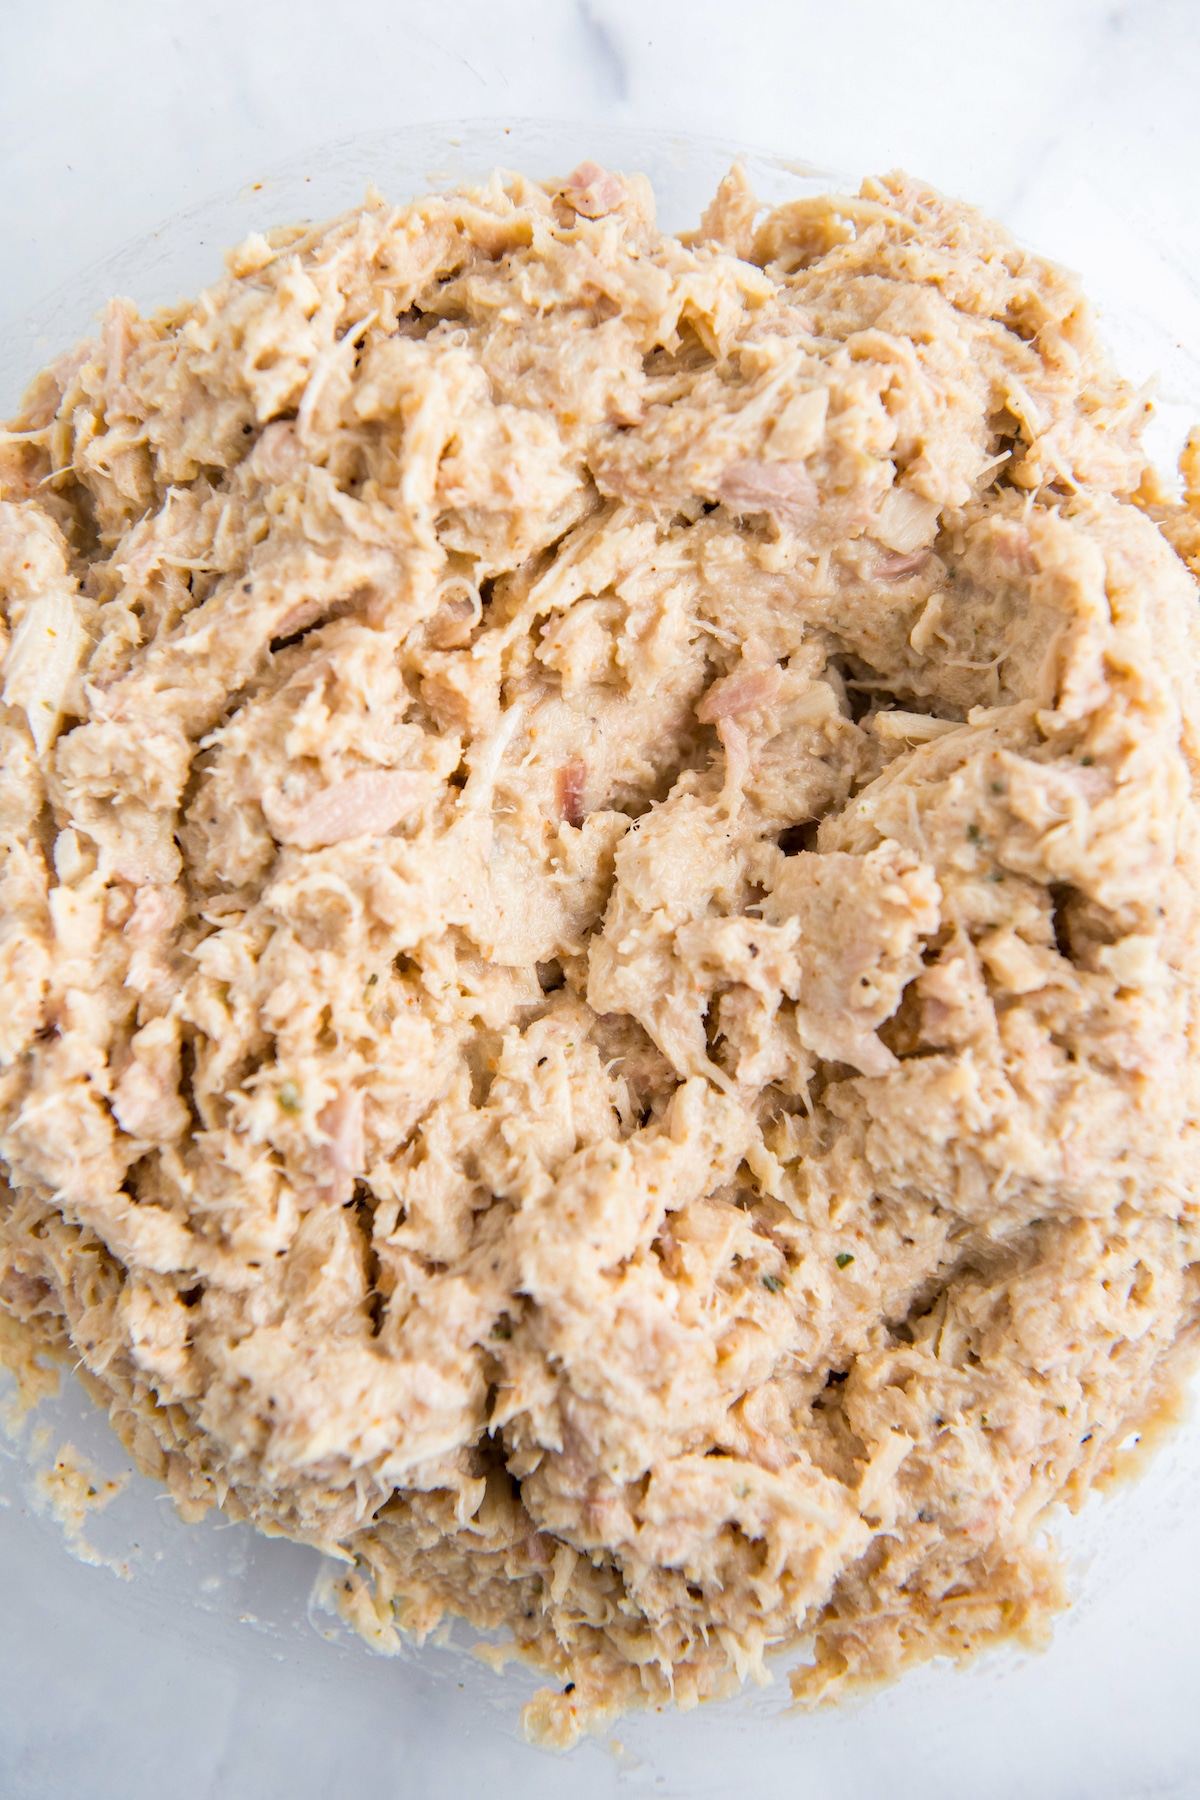 Tuna, mayo, seasonings and egg mixed together in a glass bowl.